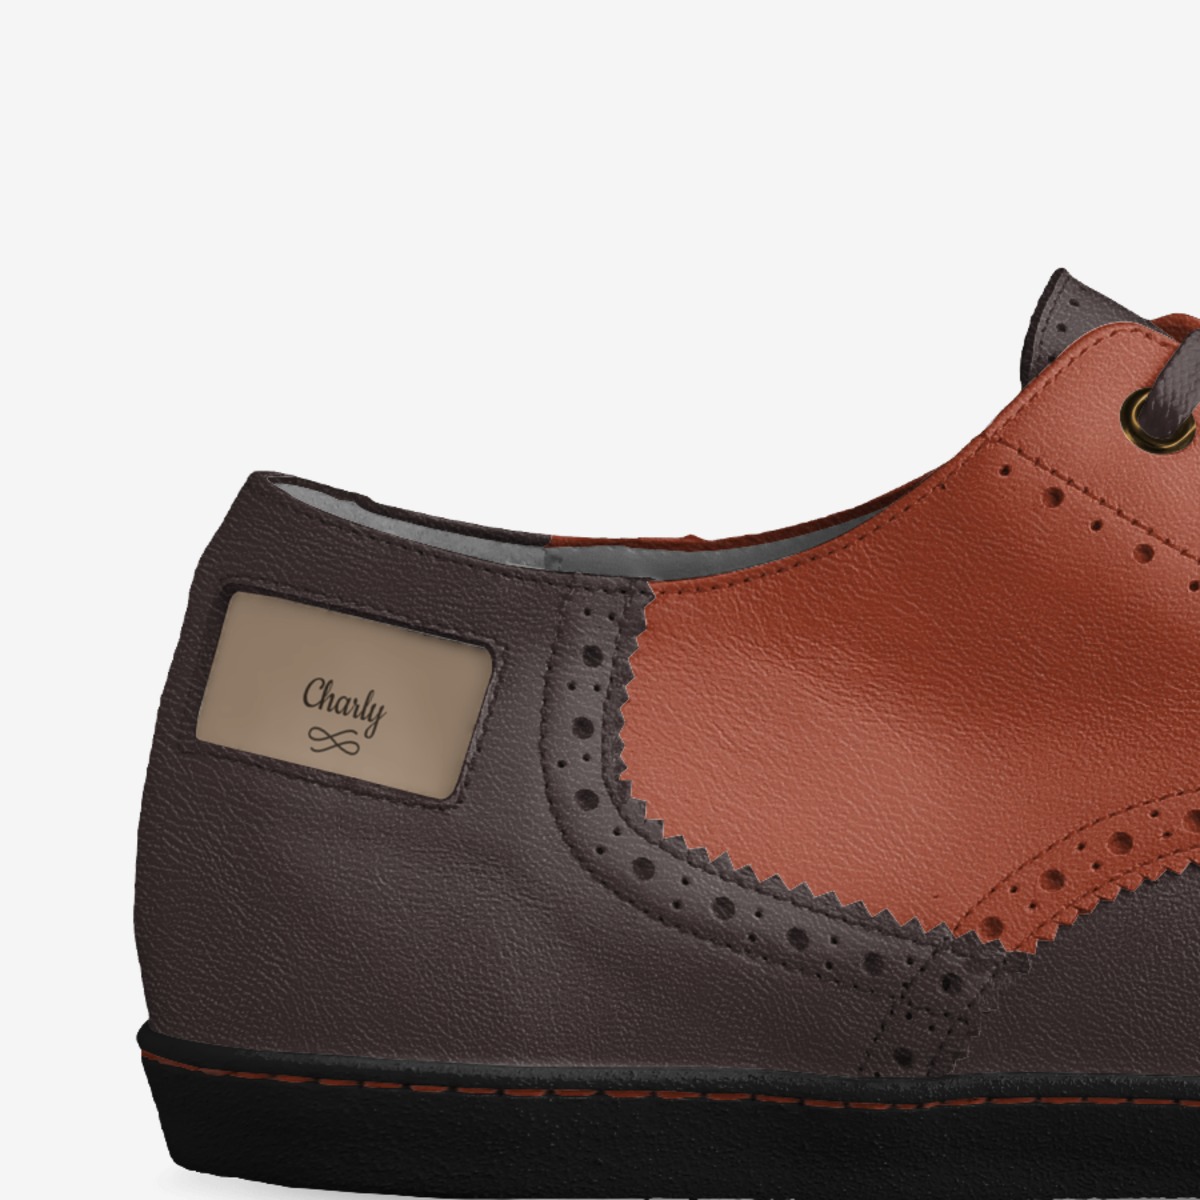 Charly | A Custom Shoe concept by Lucia Cardinali